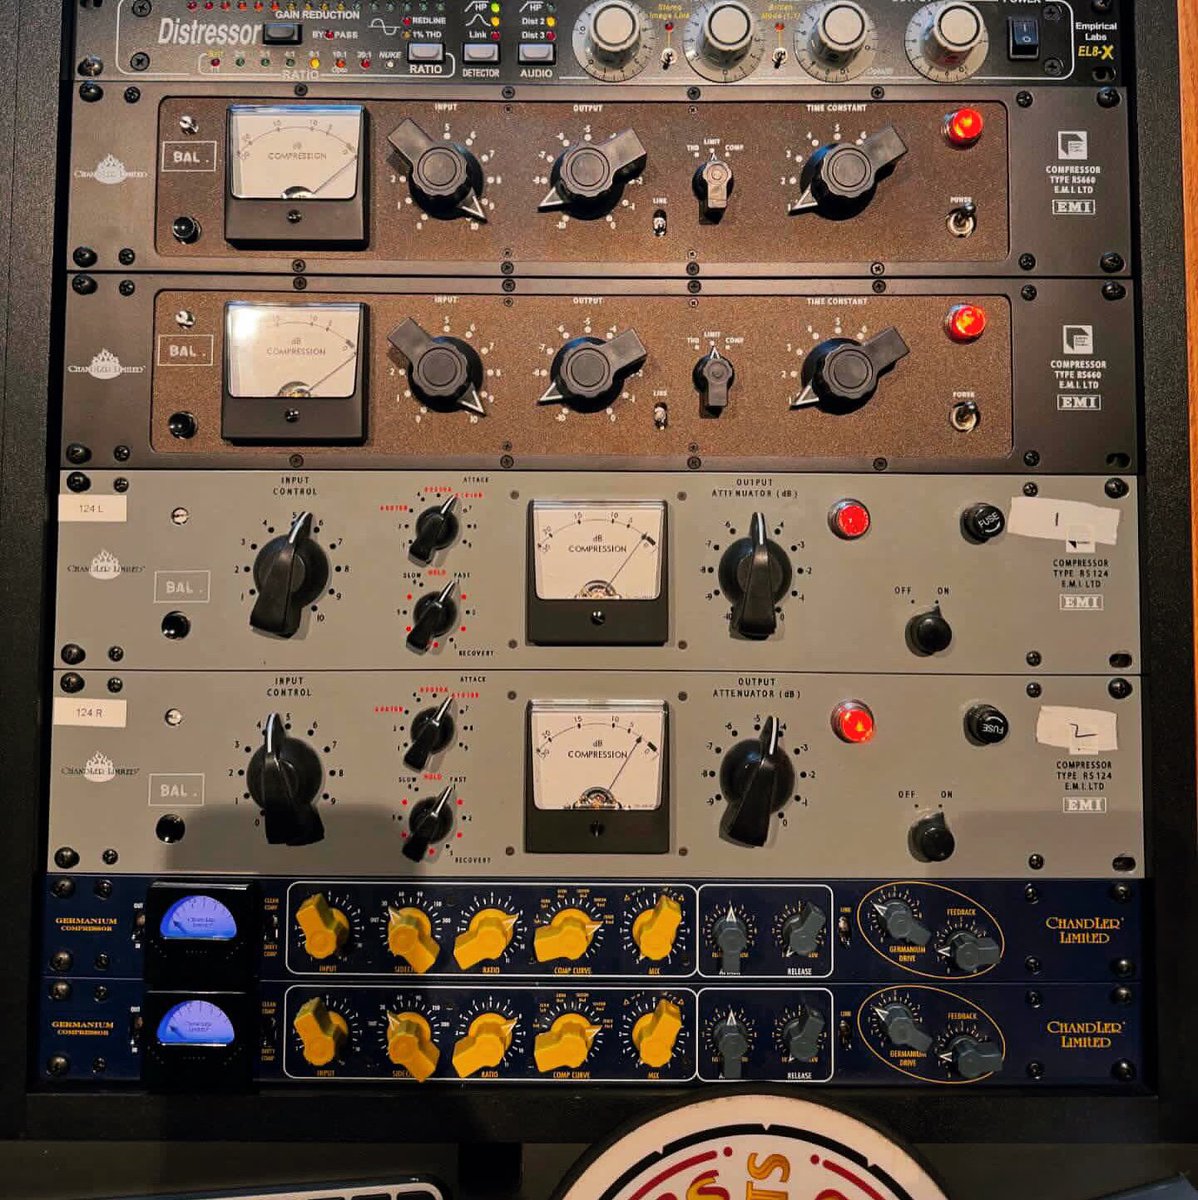 A spice rack for a studio! Tone City Recording has a great palate! Our EMI @AbbeyRoad RS660 and RS124 compressors and a pair of Germanium compressors pictured. #studiolife #recordingstudio #musicproducer #mixing #mixingengineer #recordingengineer